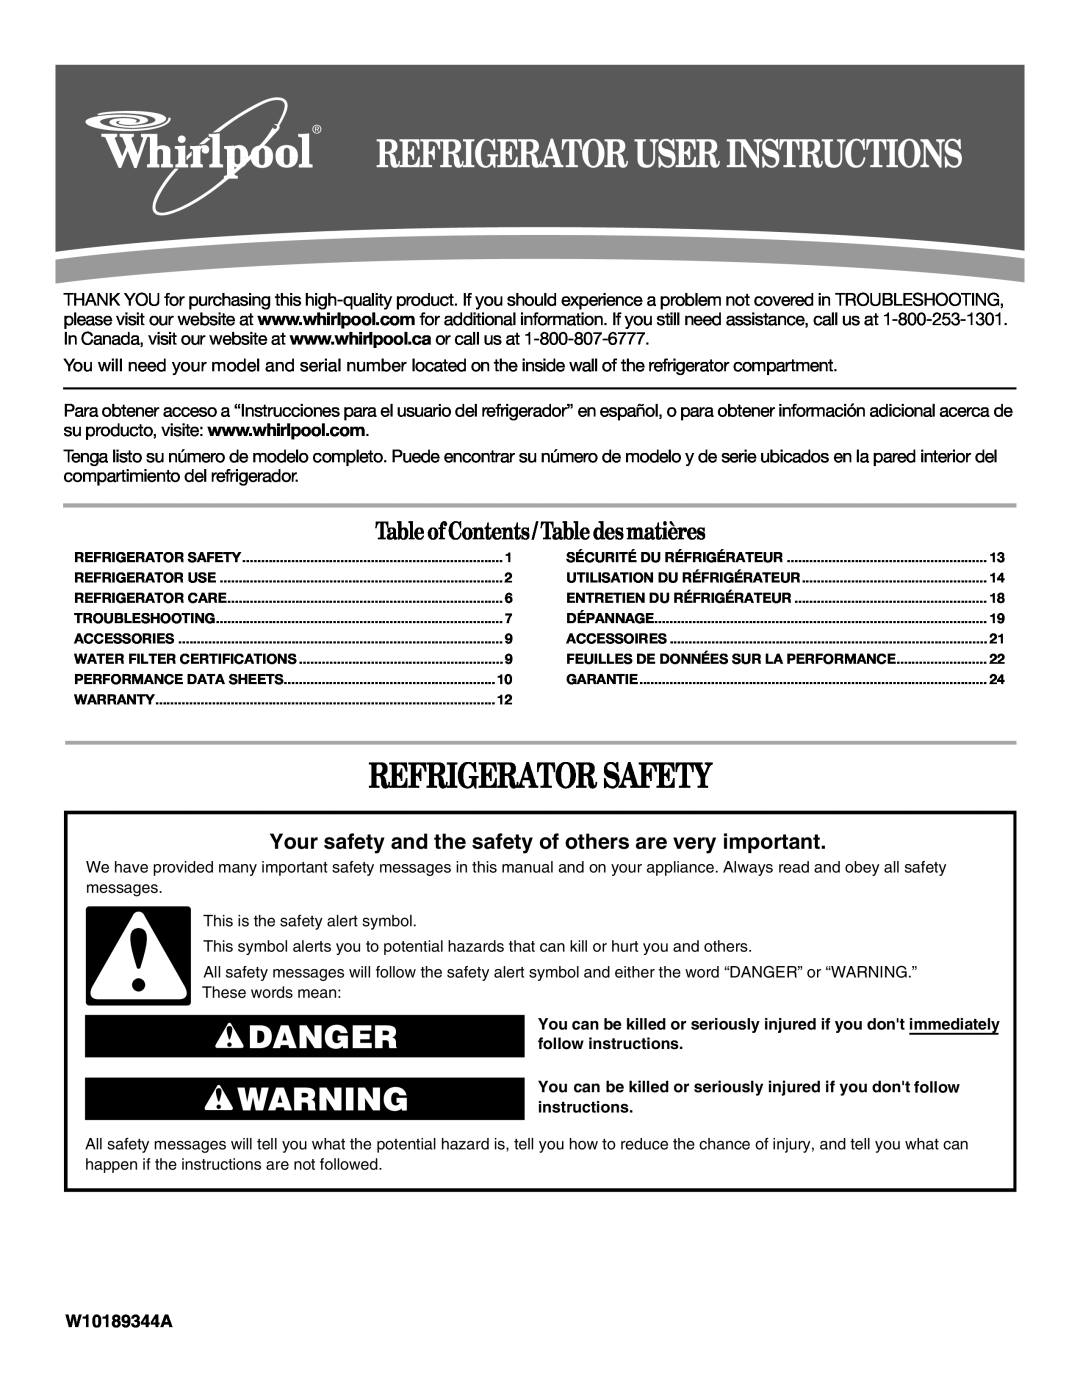 Whirlpool W10189345A warranty Refrigerator Safety, Danger, Table of Contents / Table desmatières, W10189344A 